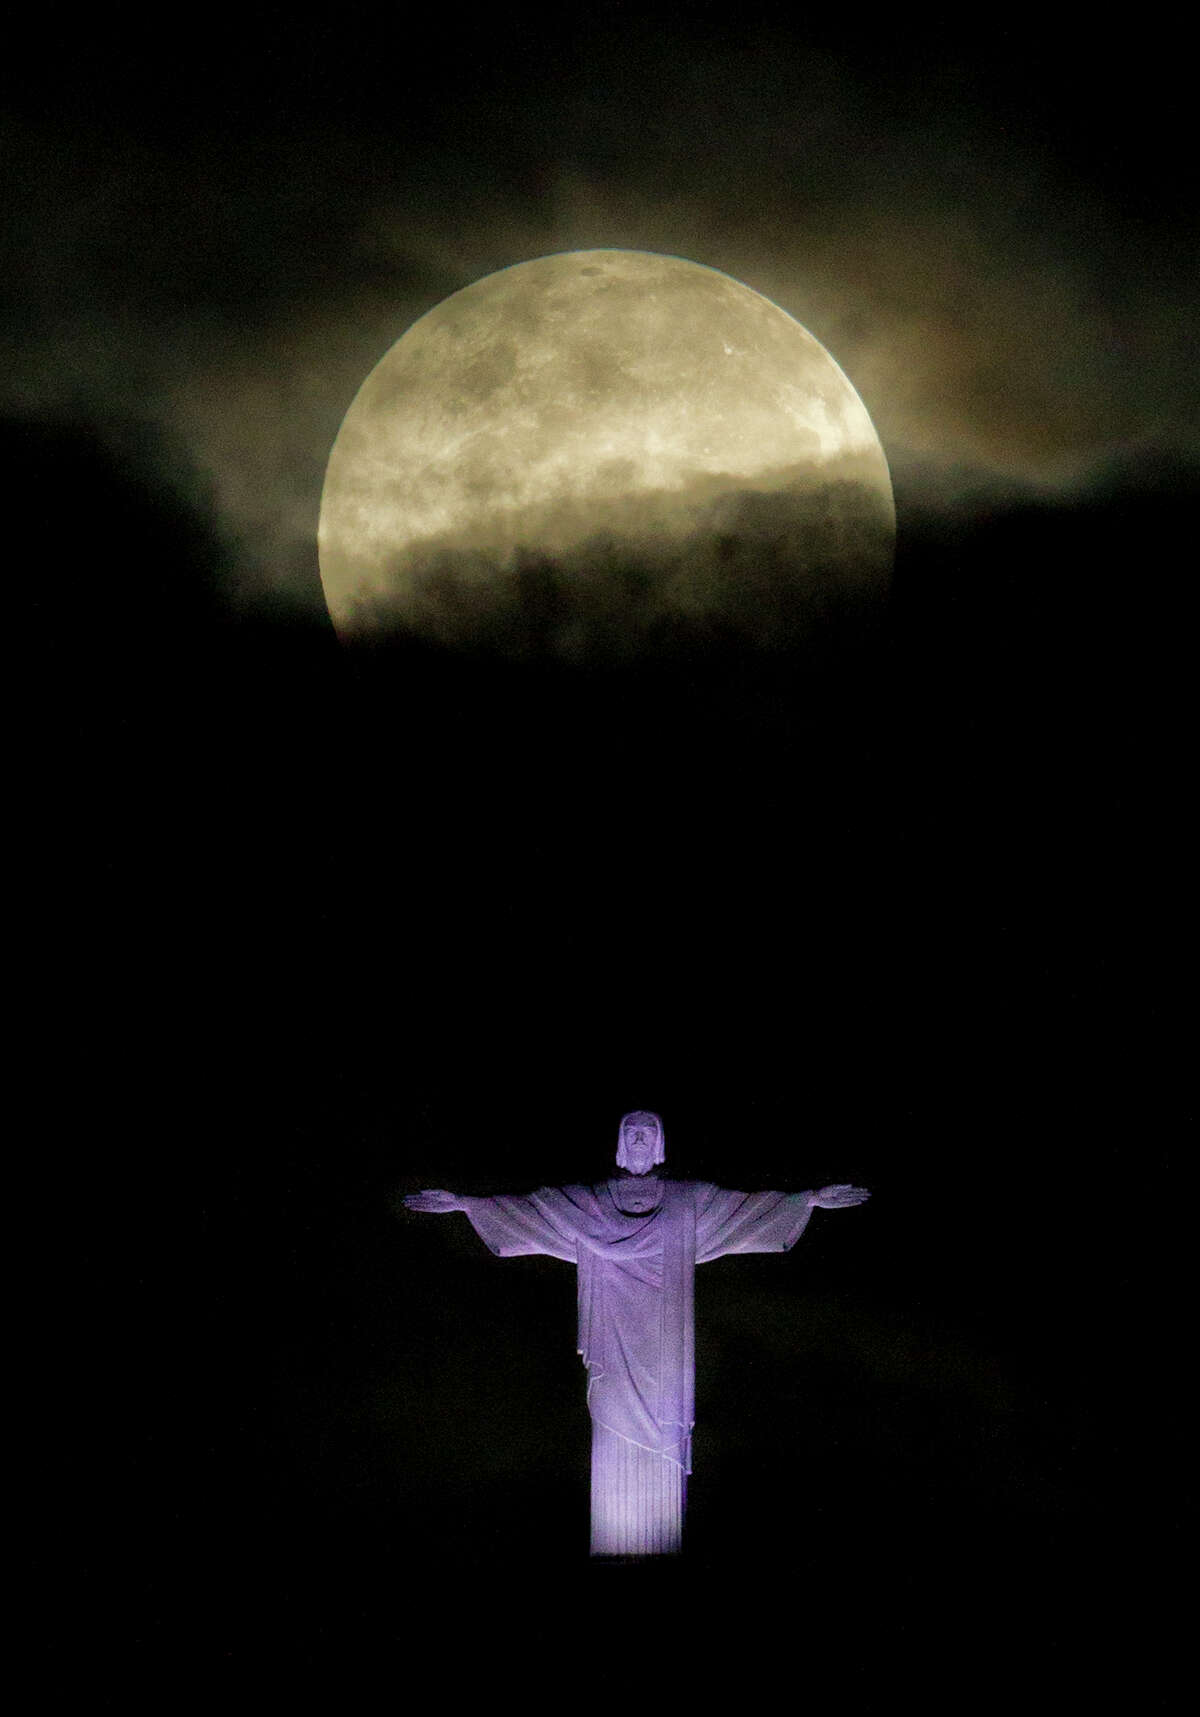 The "supermoon" appears above the Christ the Redeemer statue in Rio de Janeiro, Sunday, May 6, 2012. The moon was the closest it will get to the Earth this year _ and appeared 14 percent larger because of that. At its peak it was about 221,802 miles from Earth. (AP Photo/Victor R. Caivano)